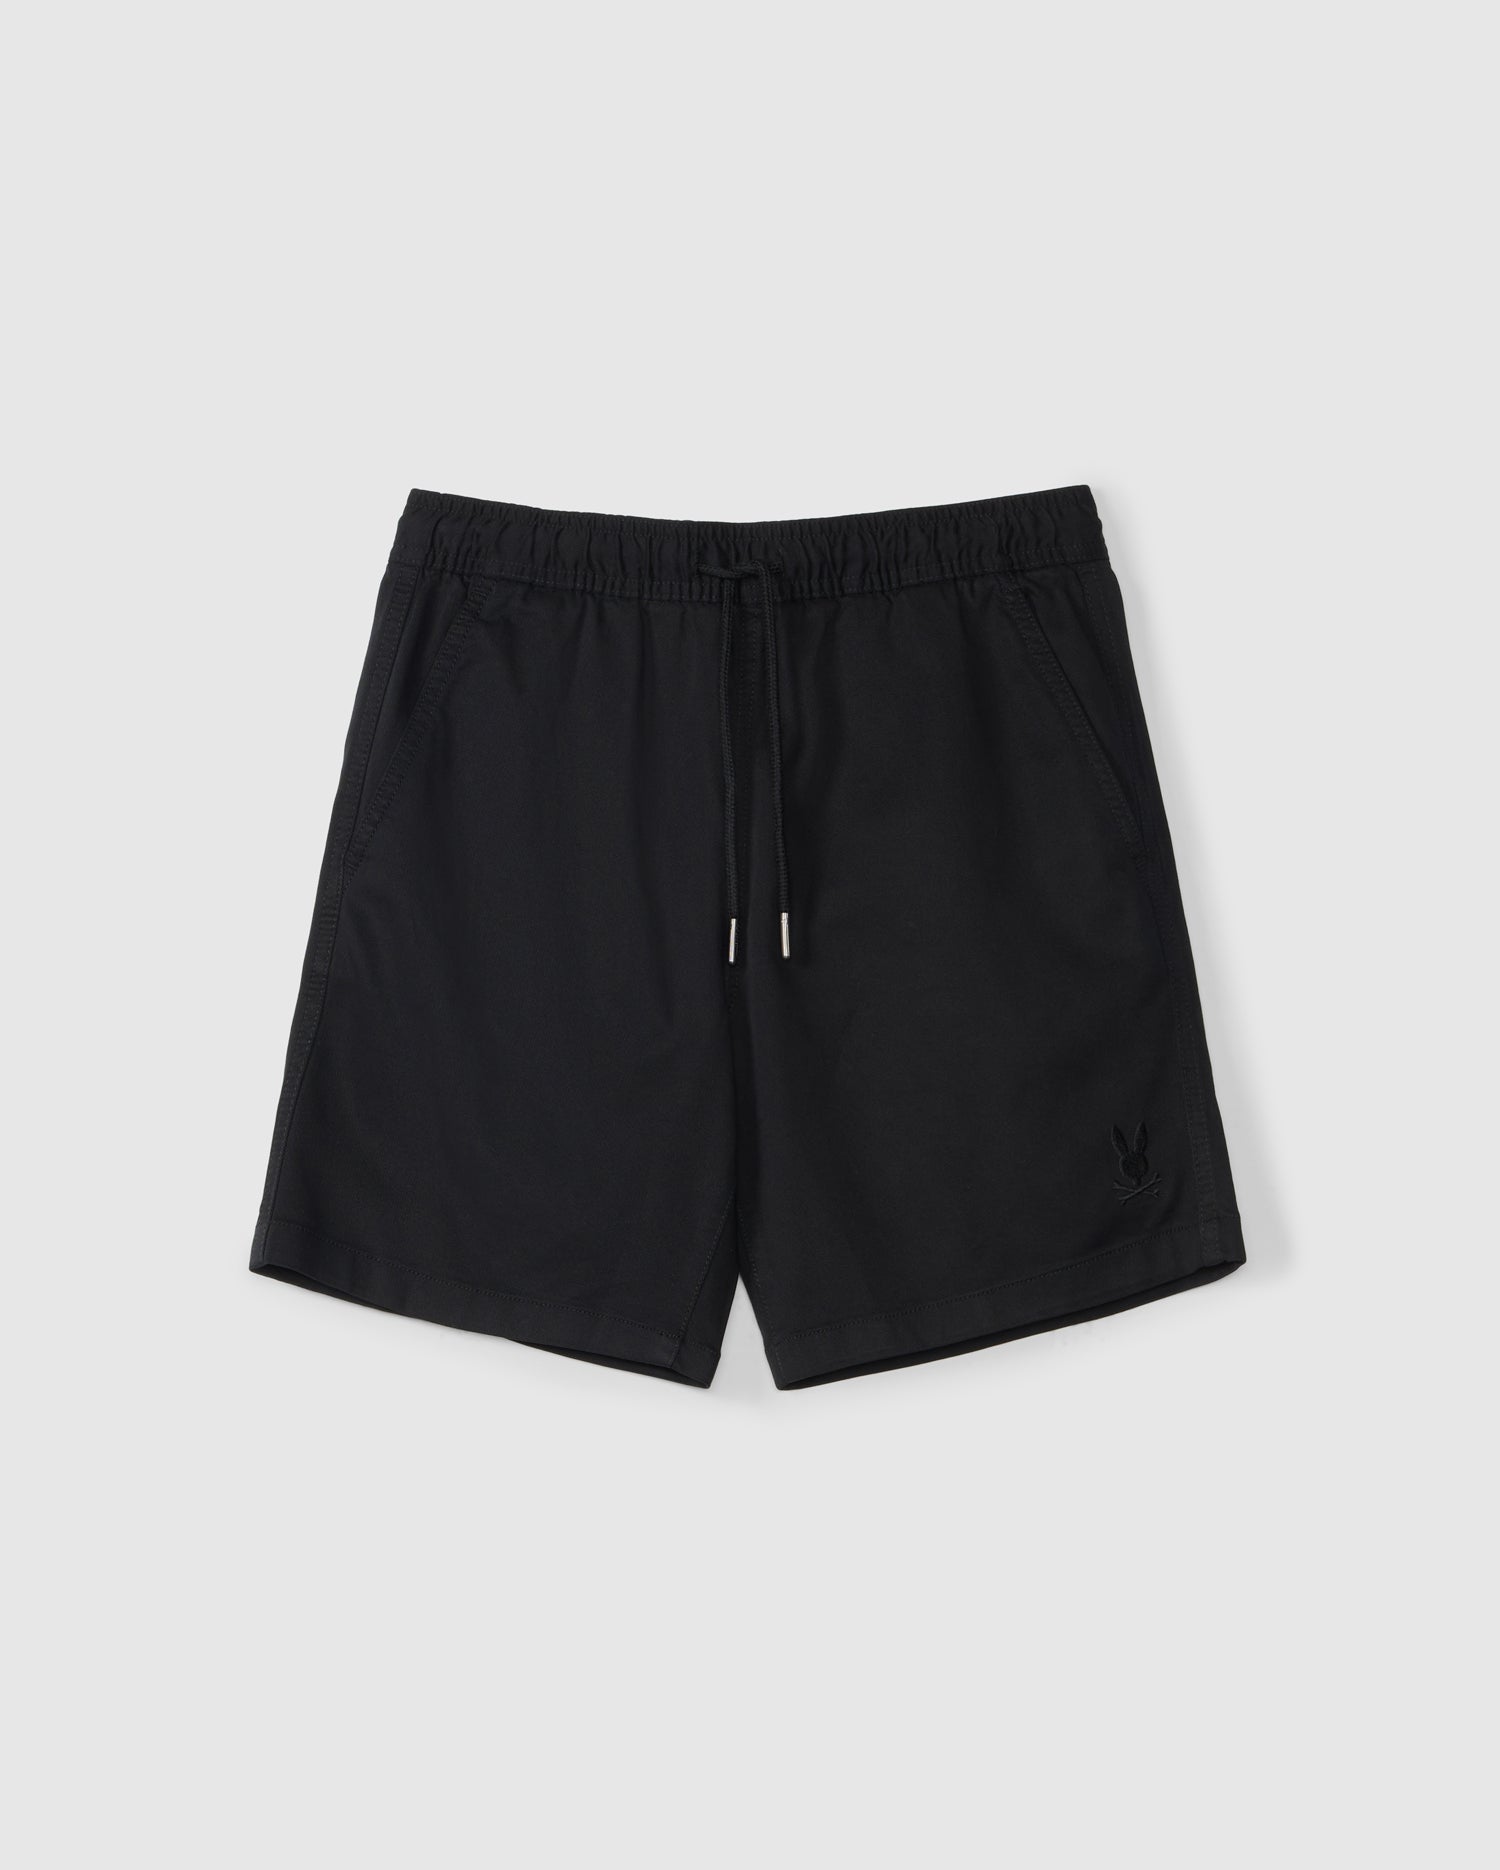 A pair of black athletic shorts with an elastic waistband and a drawstring. The slim fit shorts feature two side pockets and a small embroidered Bunny logo on the bottom left front. Made from a Stretch TENCEL-blend, they are displayed on a plain white background. The product is the KIDS WILLIS STRETCH TENCEL SHORT - B0R239Y1WB by Psycho Bunny.